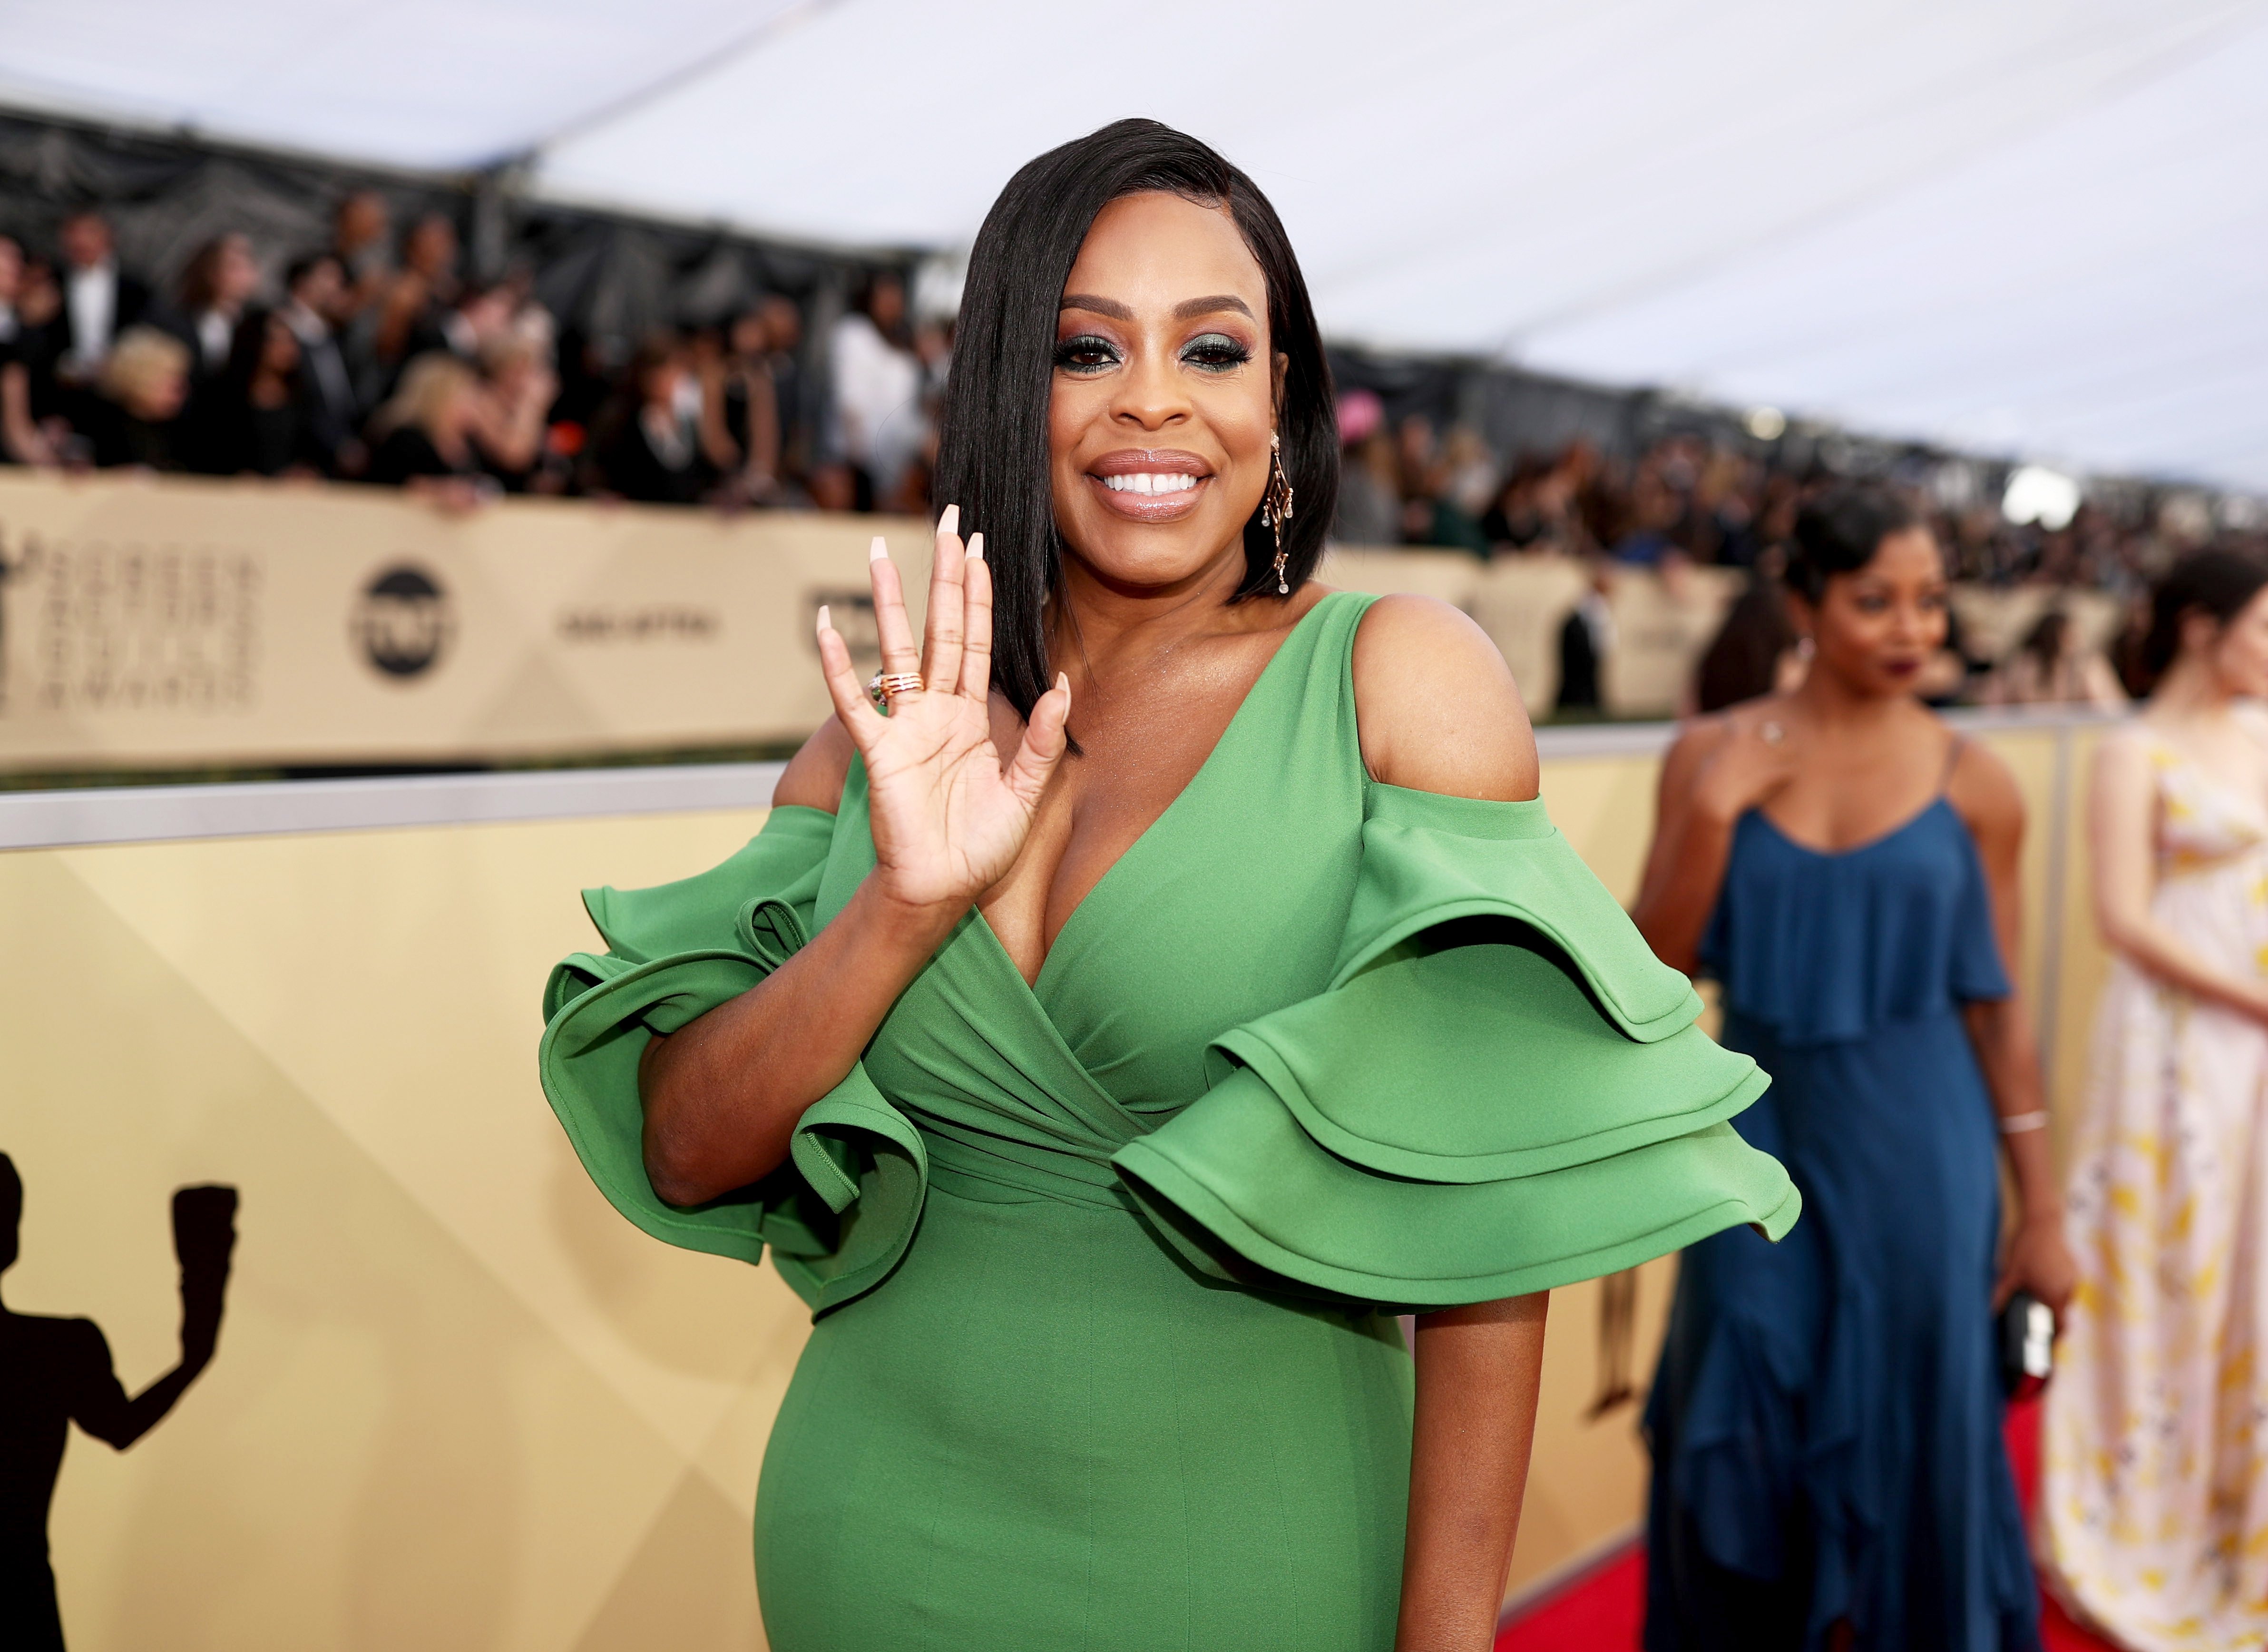 Niecy Nash at the 24th Annual Screen Actors Guild Awards at The Shrine Auditorium on January 21, 2018 in Los Angeles, California. | Source: Getty Images